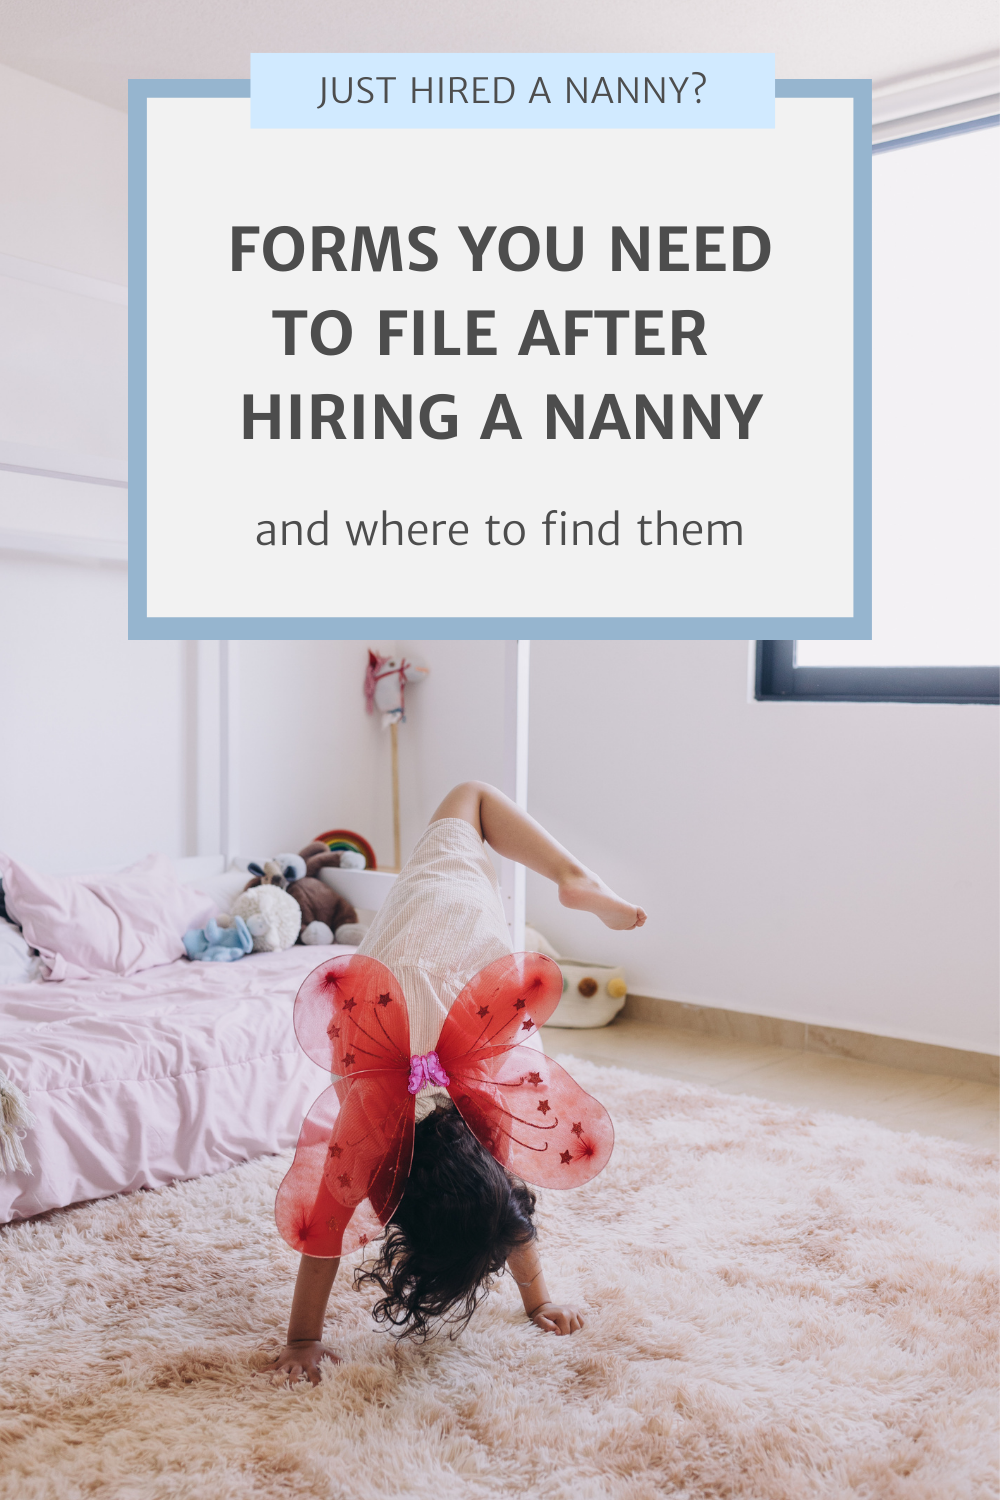 Forms you need to file after hiring a nanny